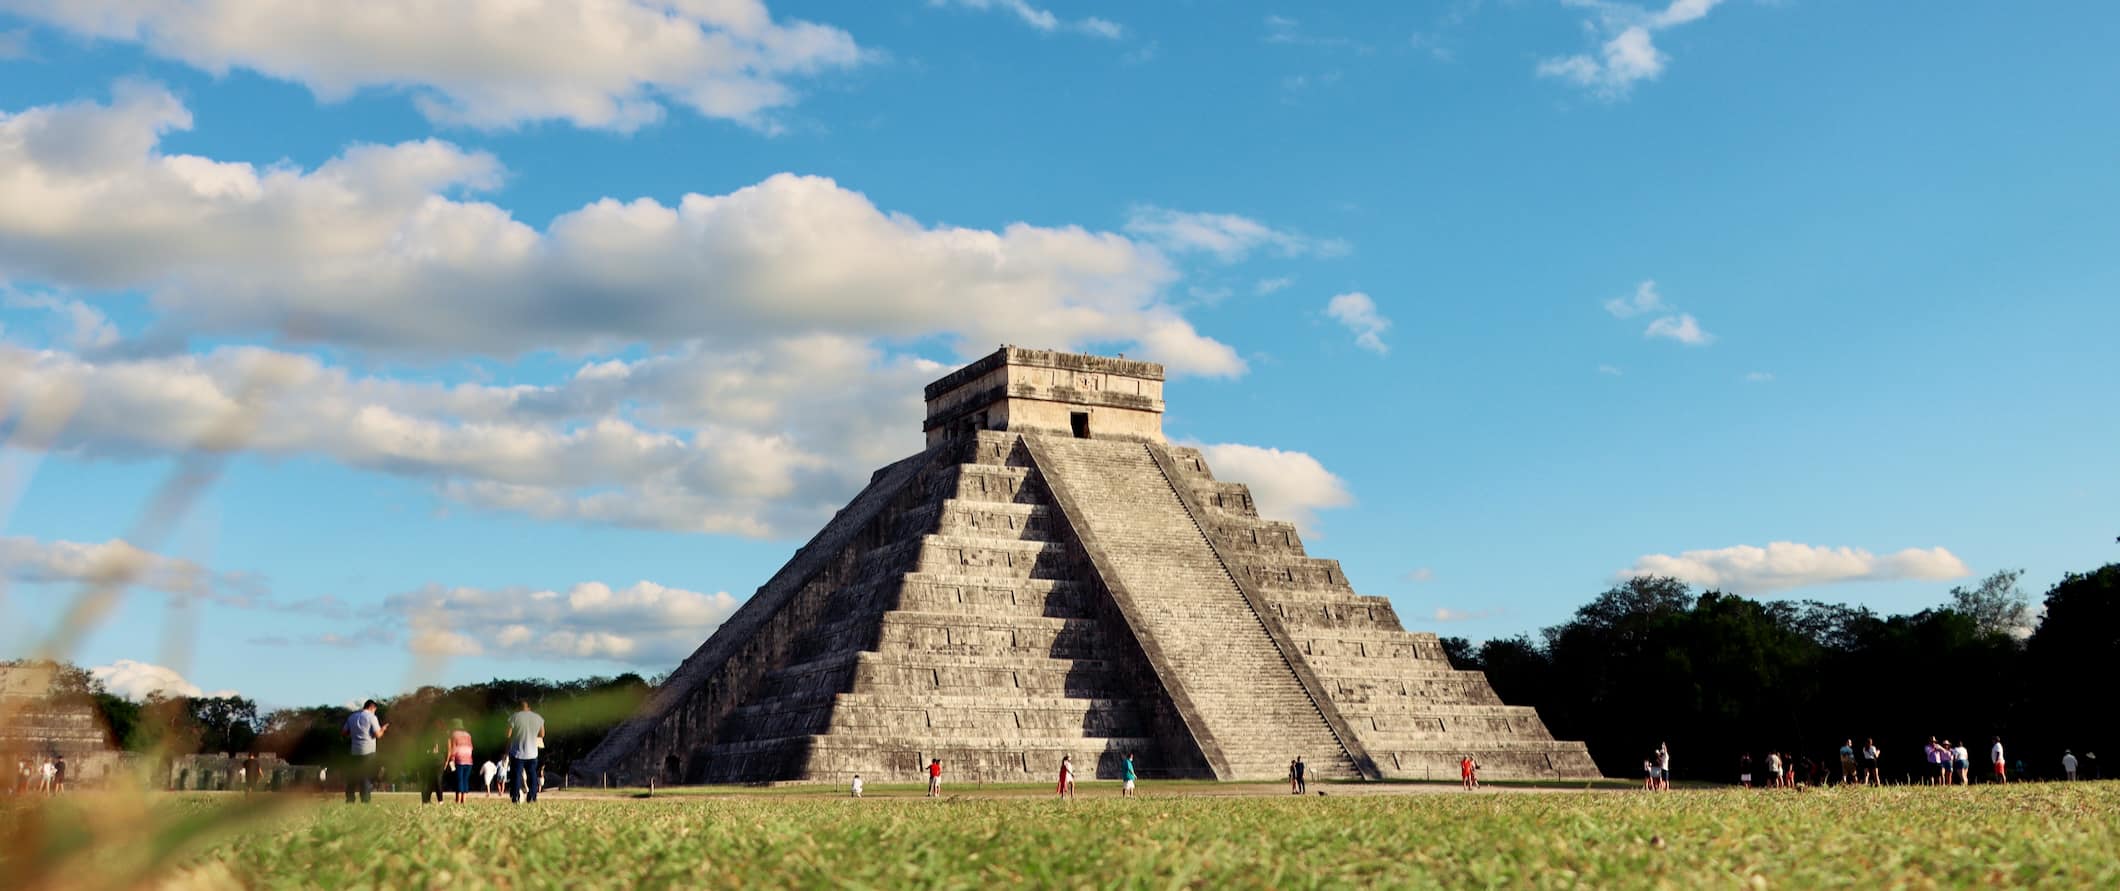 The famous ruins of Chichen Itza, the Wonder of the World, in beautiful Mexico